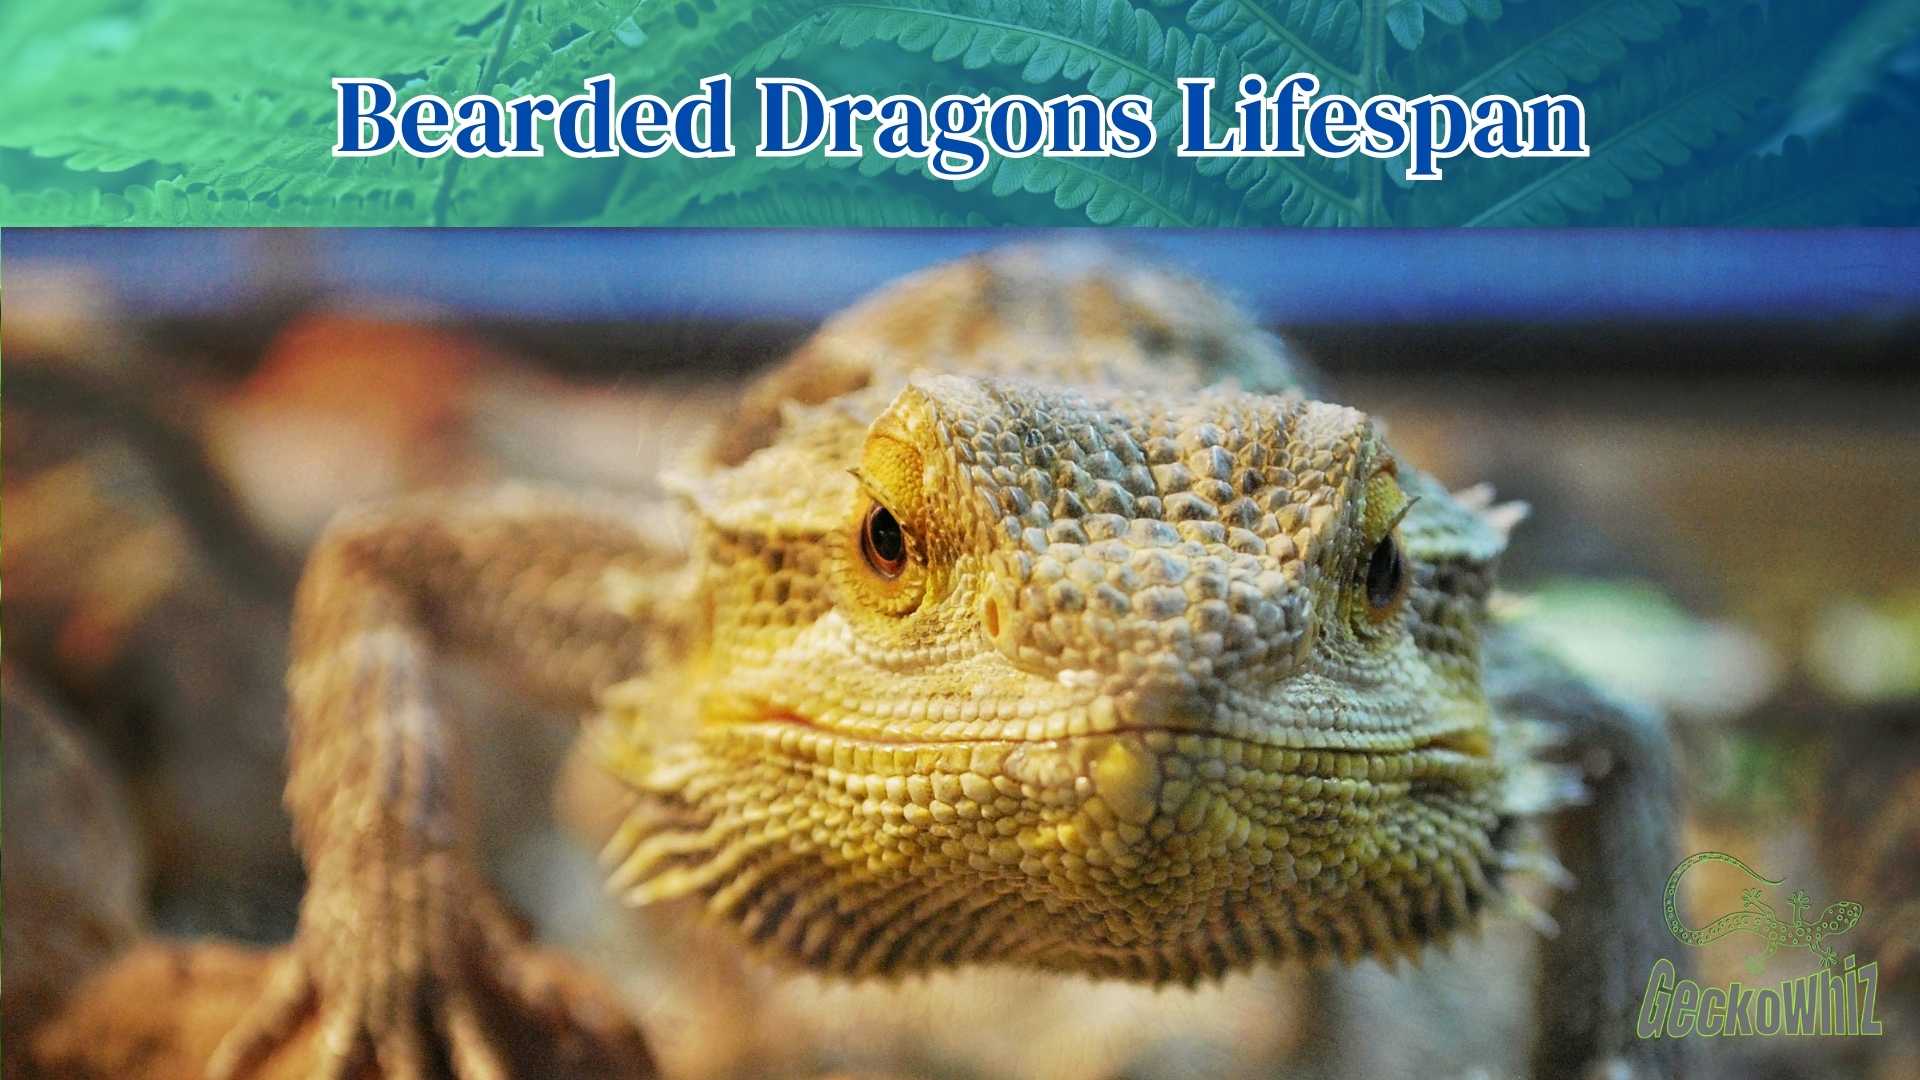 The Bearded Dragons Lifespan: Everything You Need to Know